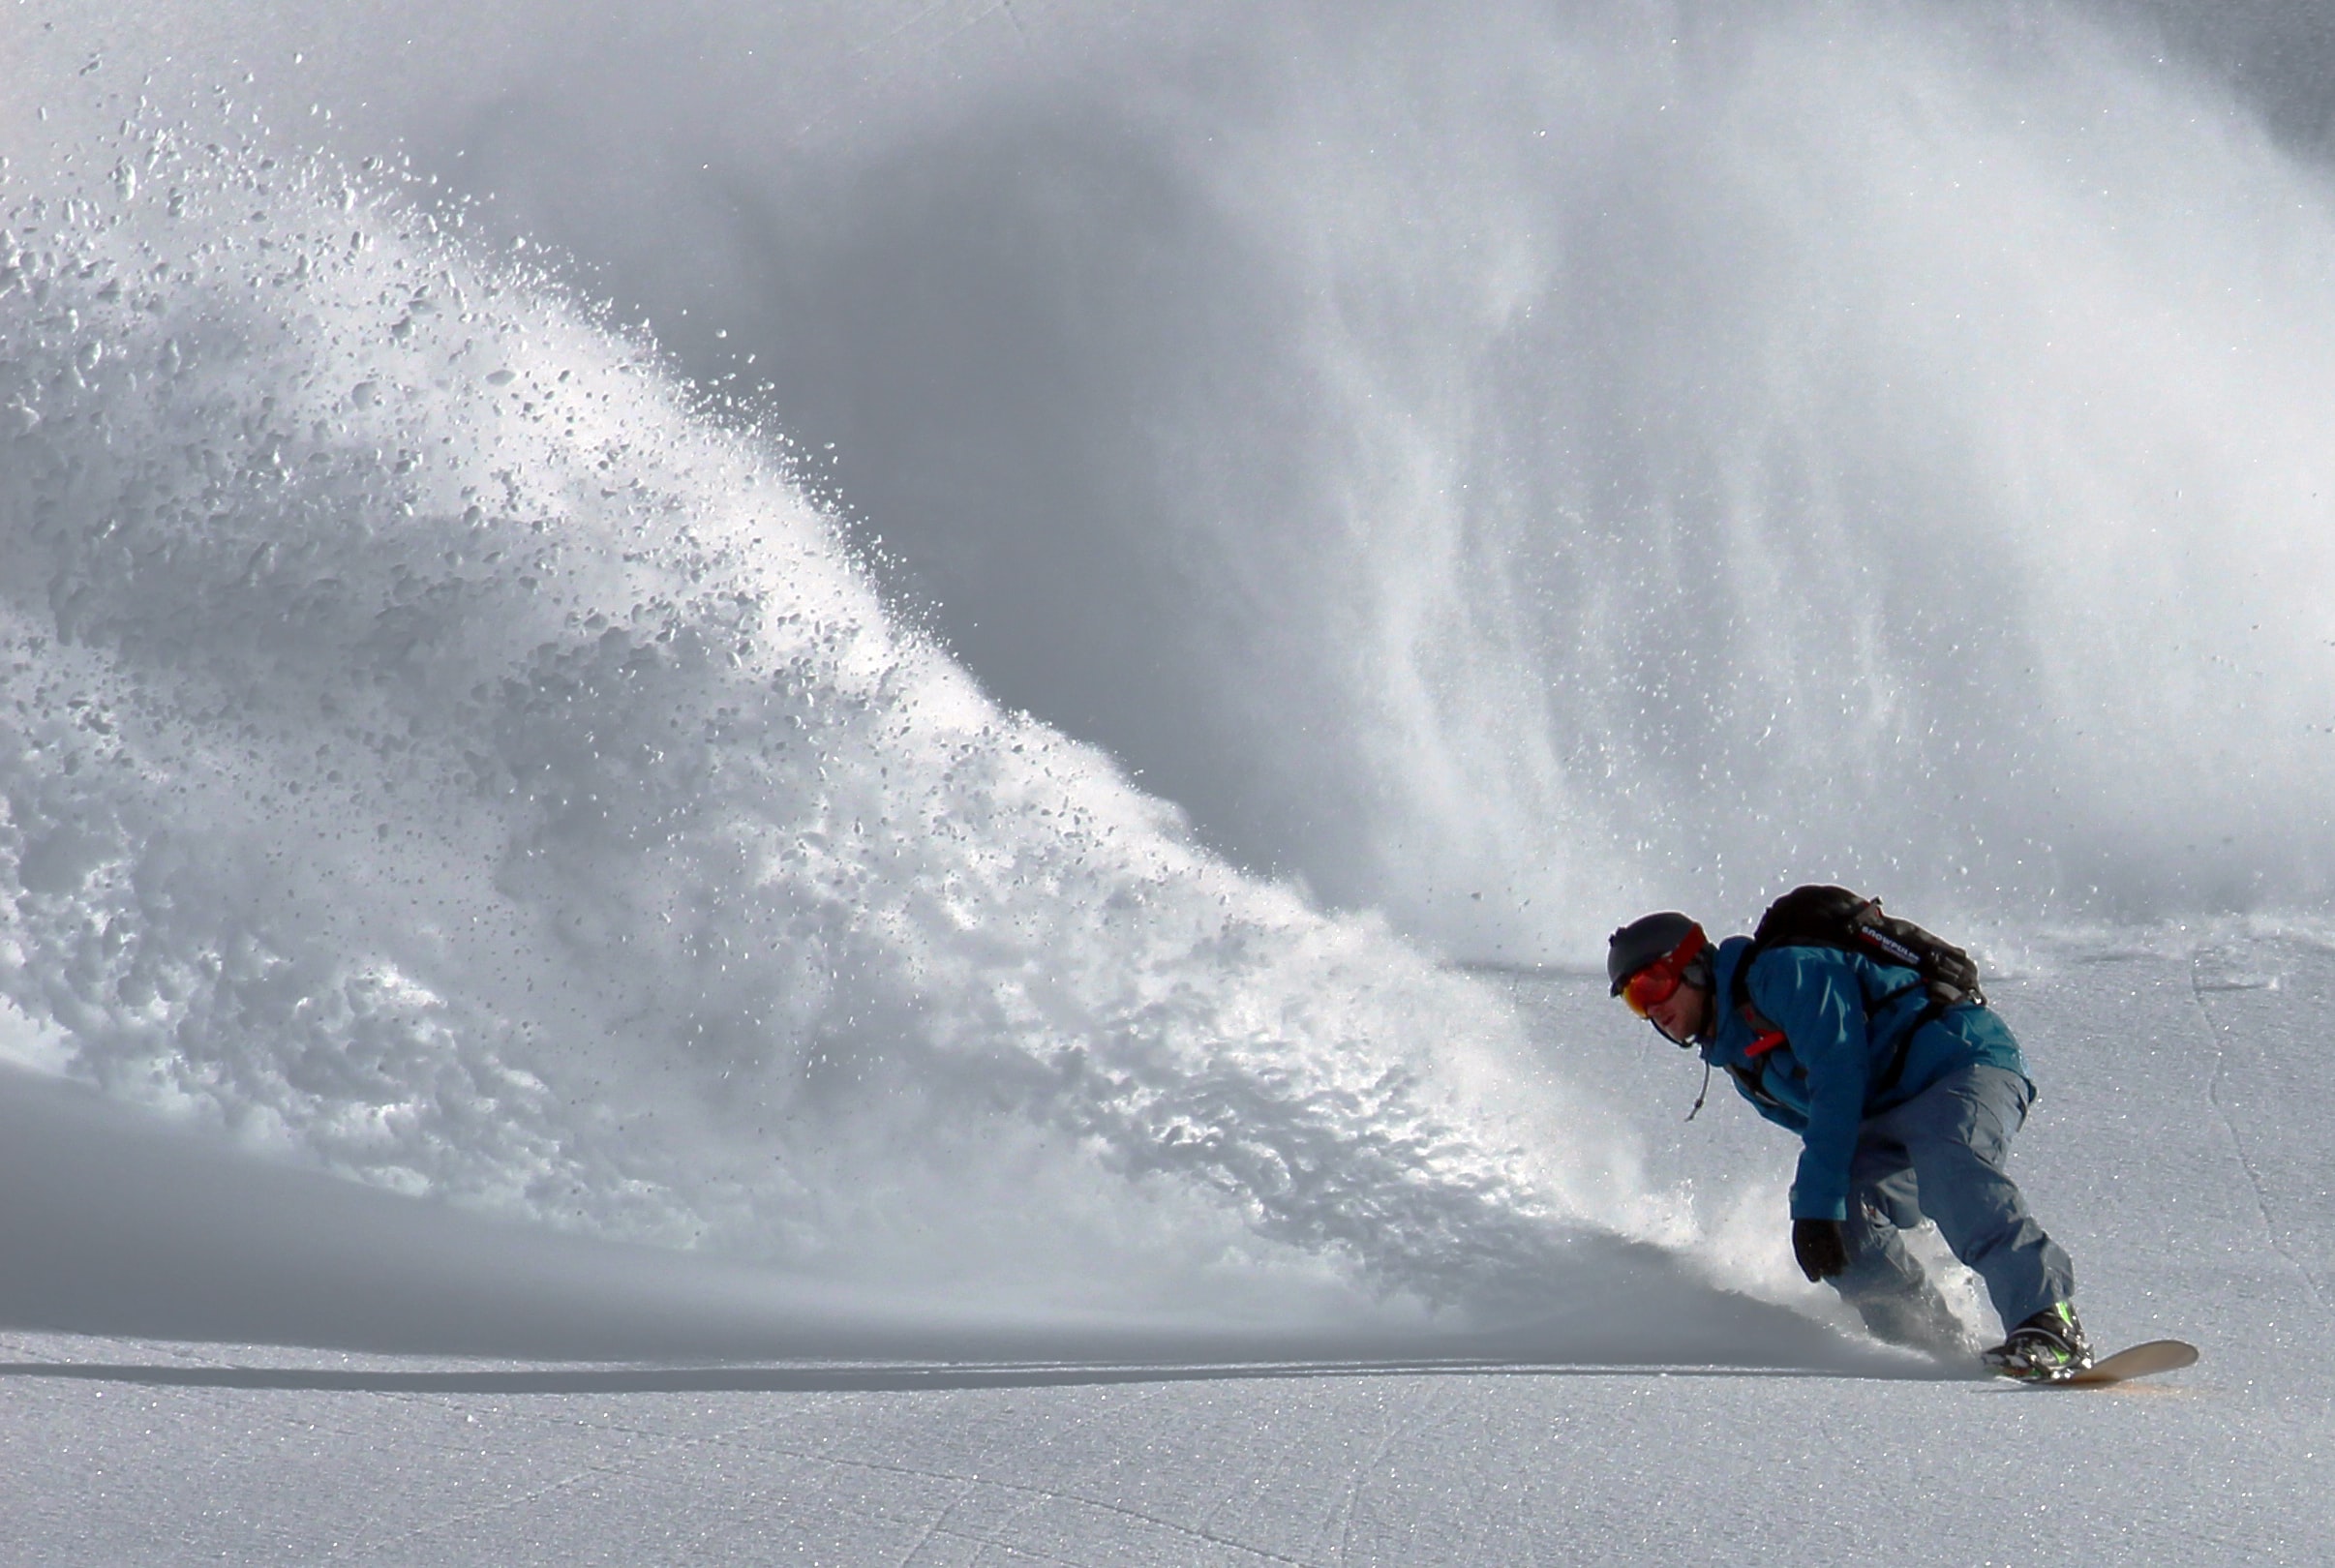 Powder is light fluffy snow that is a favorite of skiers and snowboarders.